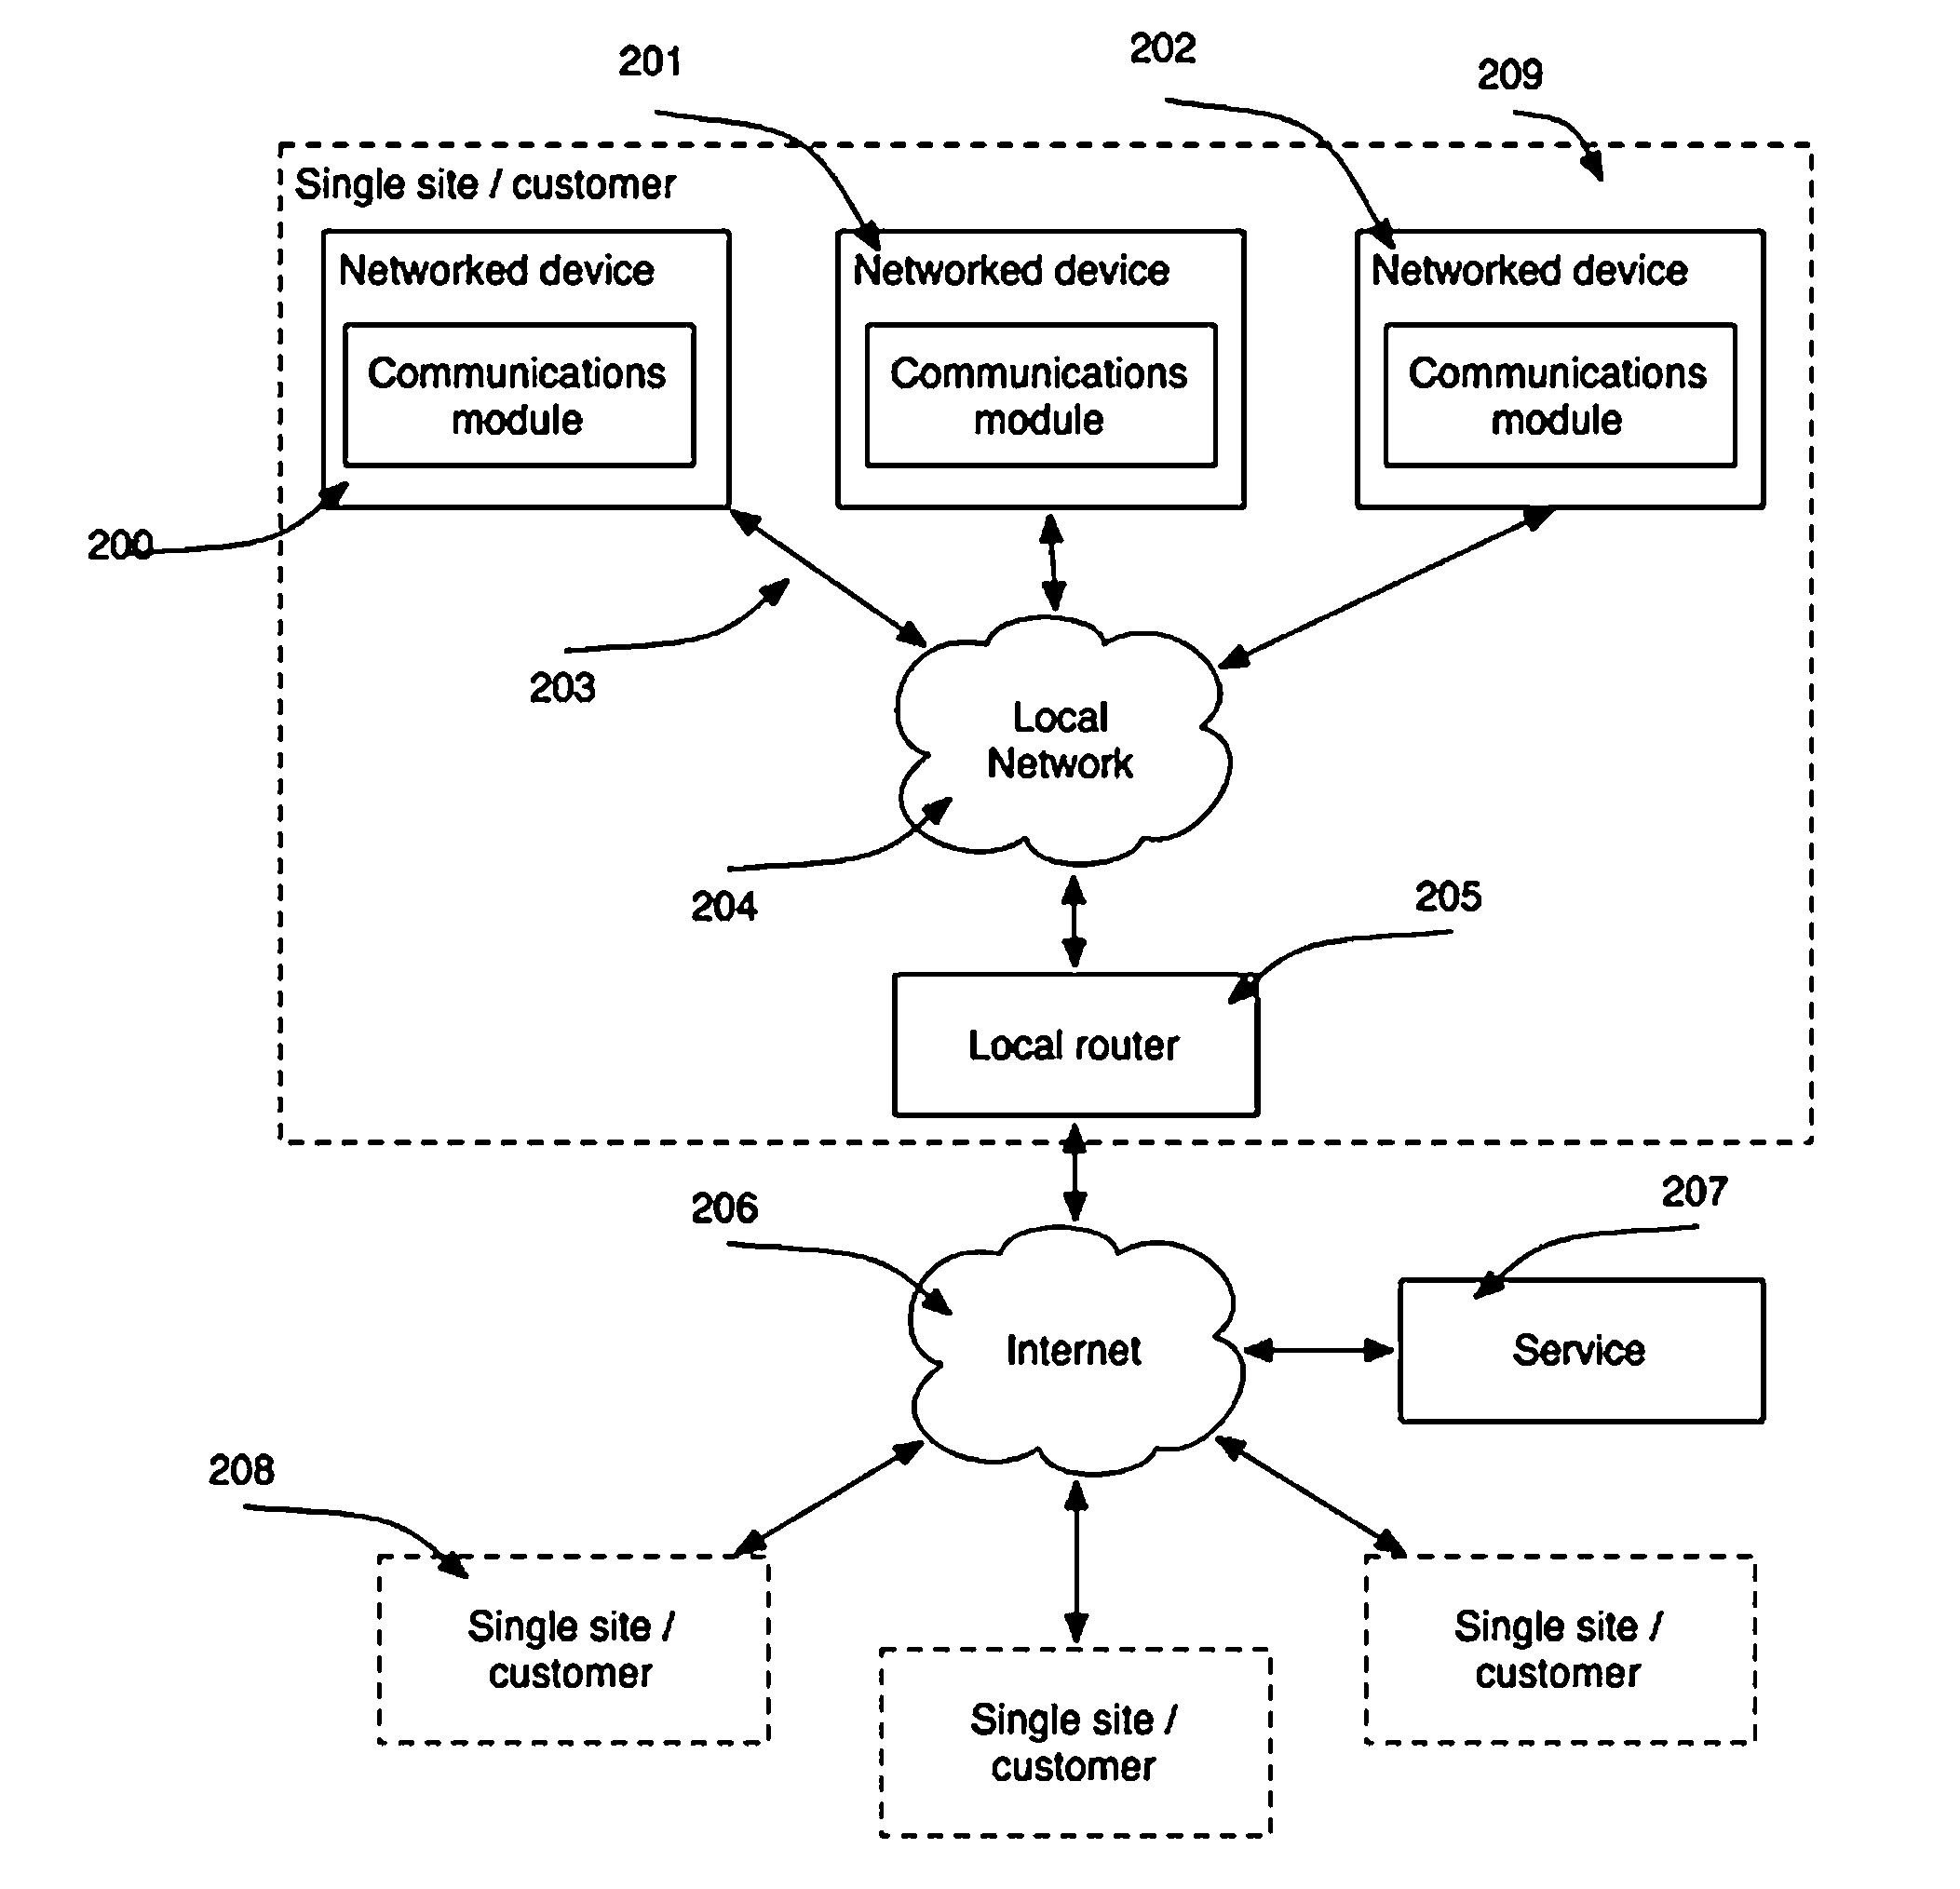 Optically configured modularized control system to enable wireless network control and sensing of other devices